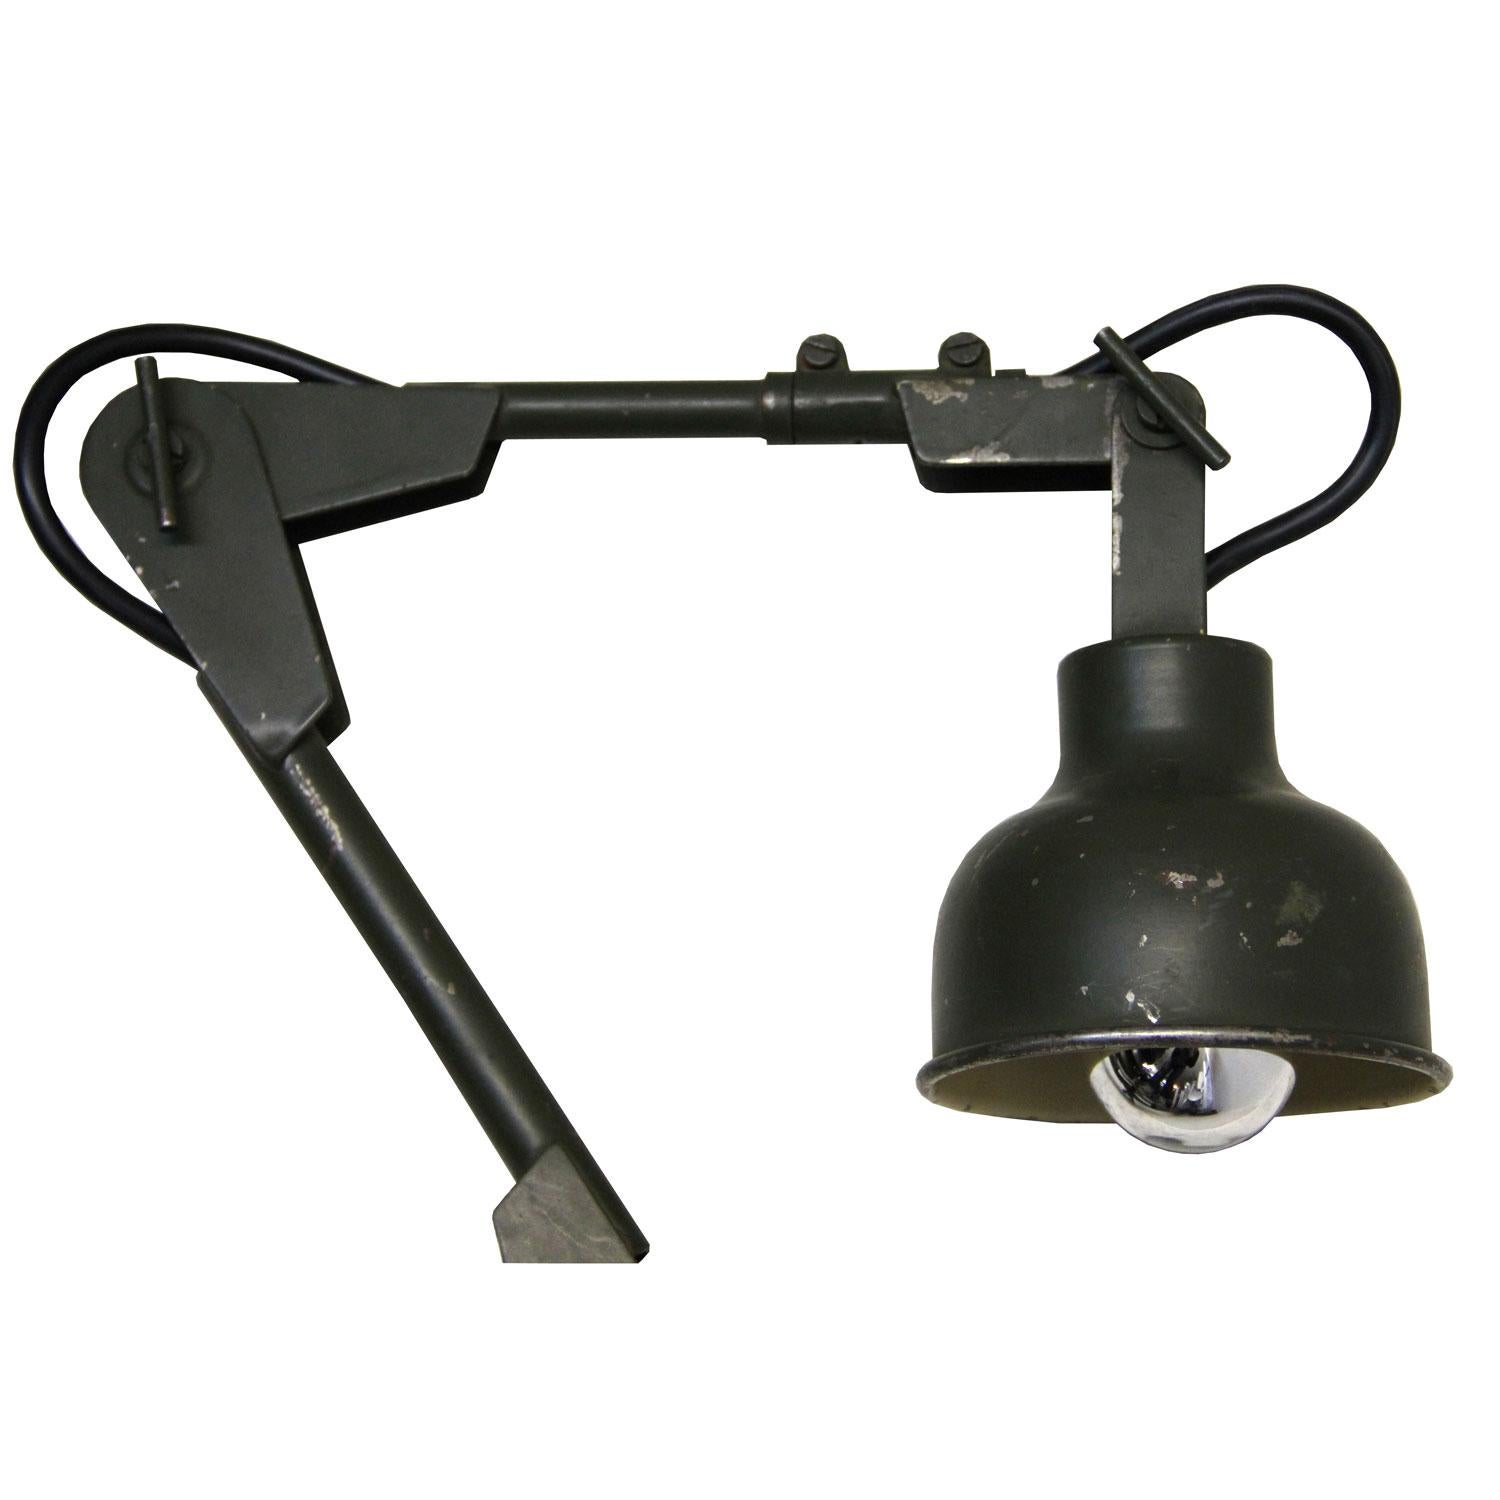 British metal industrial work light.
Green shade and arm with table clamp.

Weight: 2.5 kg / 5.5 lb.

Priced individual item. All lamps have been made suitable by international standards for incandescent light bulbs, energy-efficient and LED bulbs